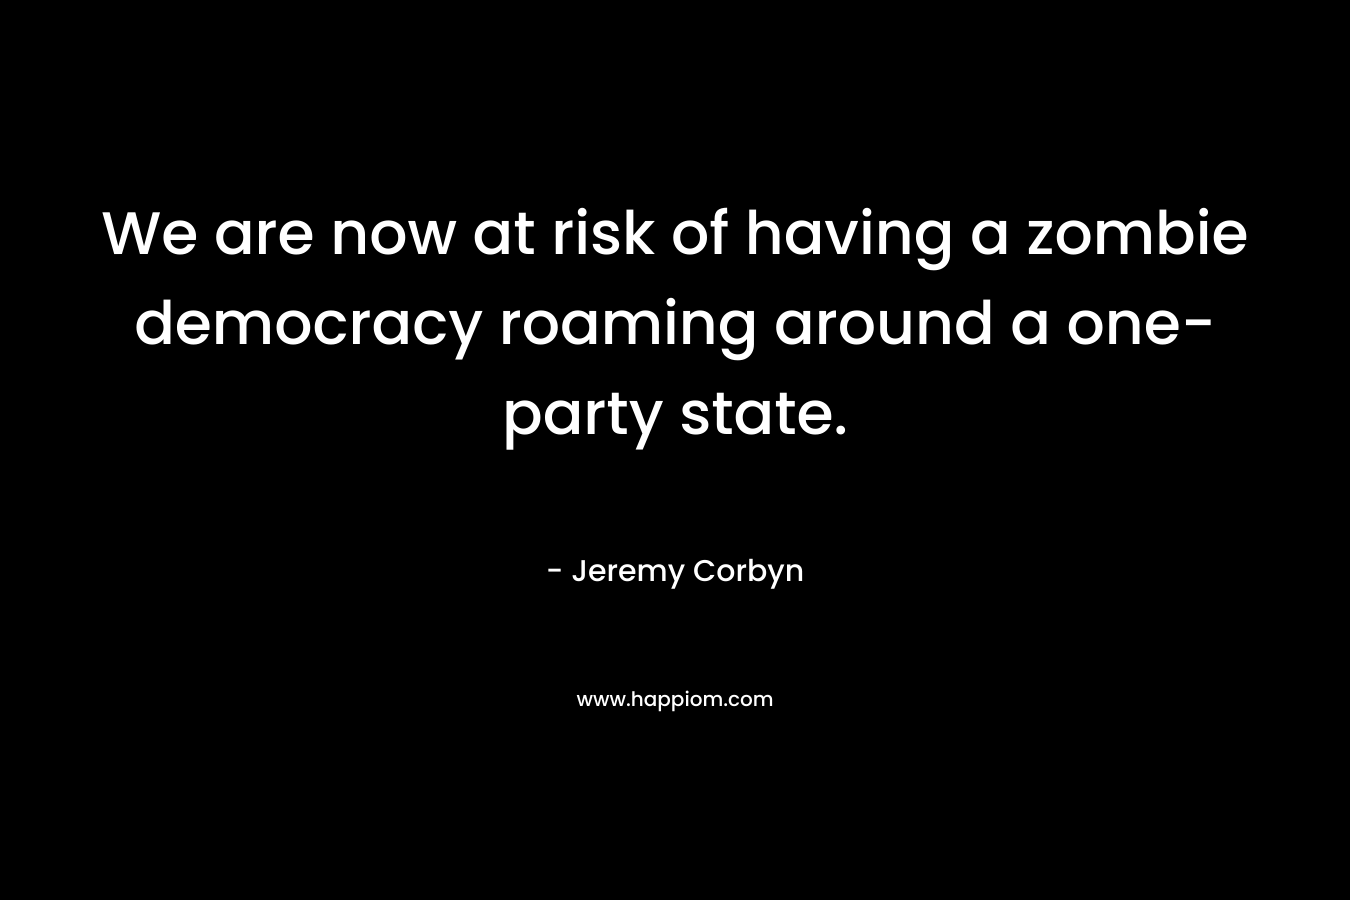 We are now at risk of having a zombie democracy roaming around a one-party state. – Jeremy Corbyn